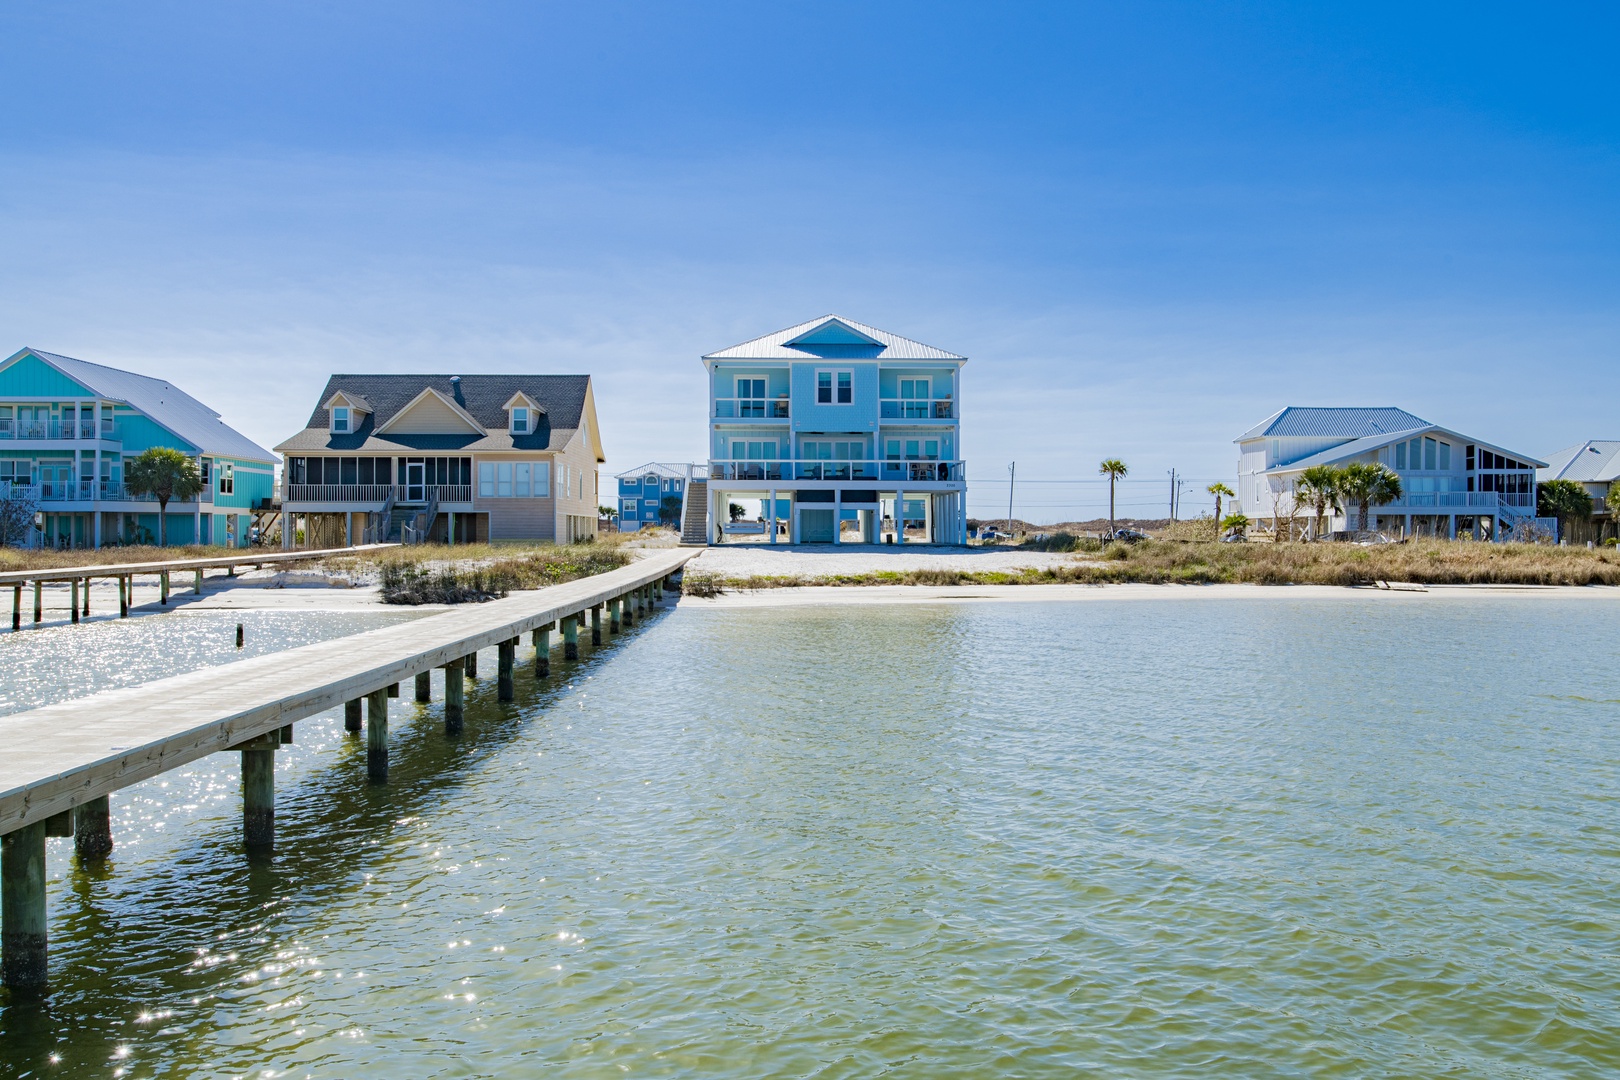 Views of the beautiful home from the pier